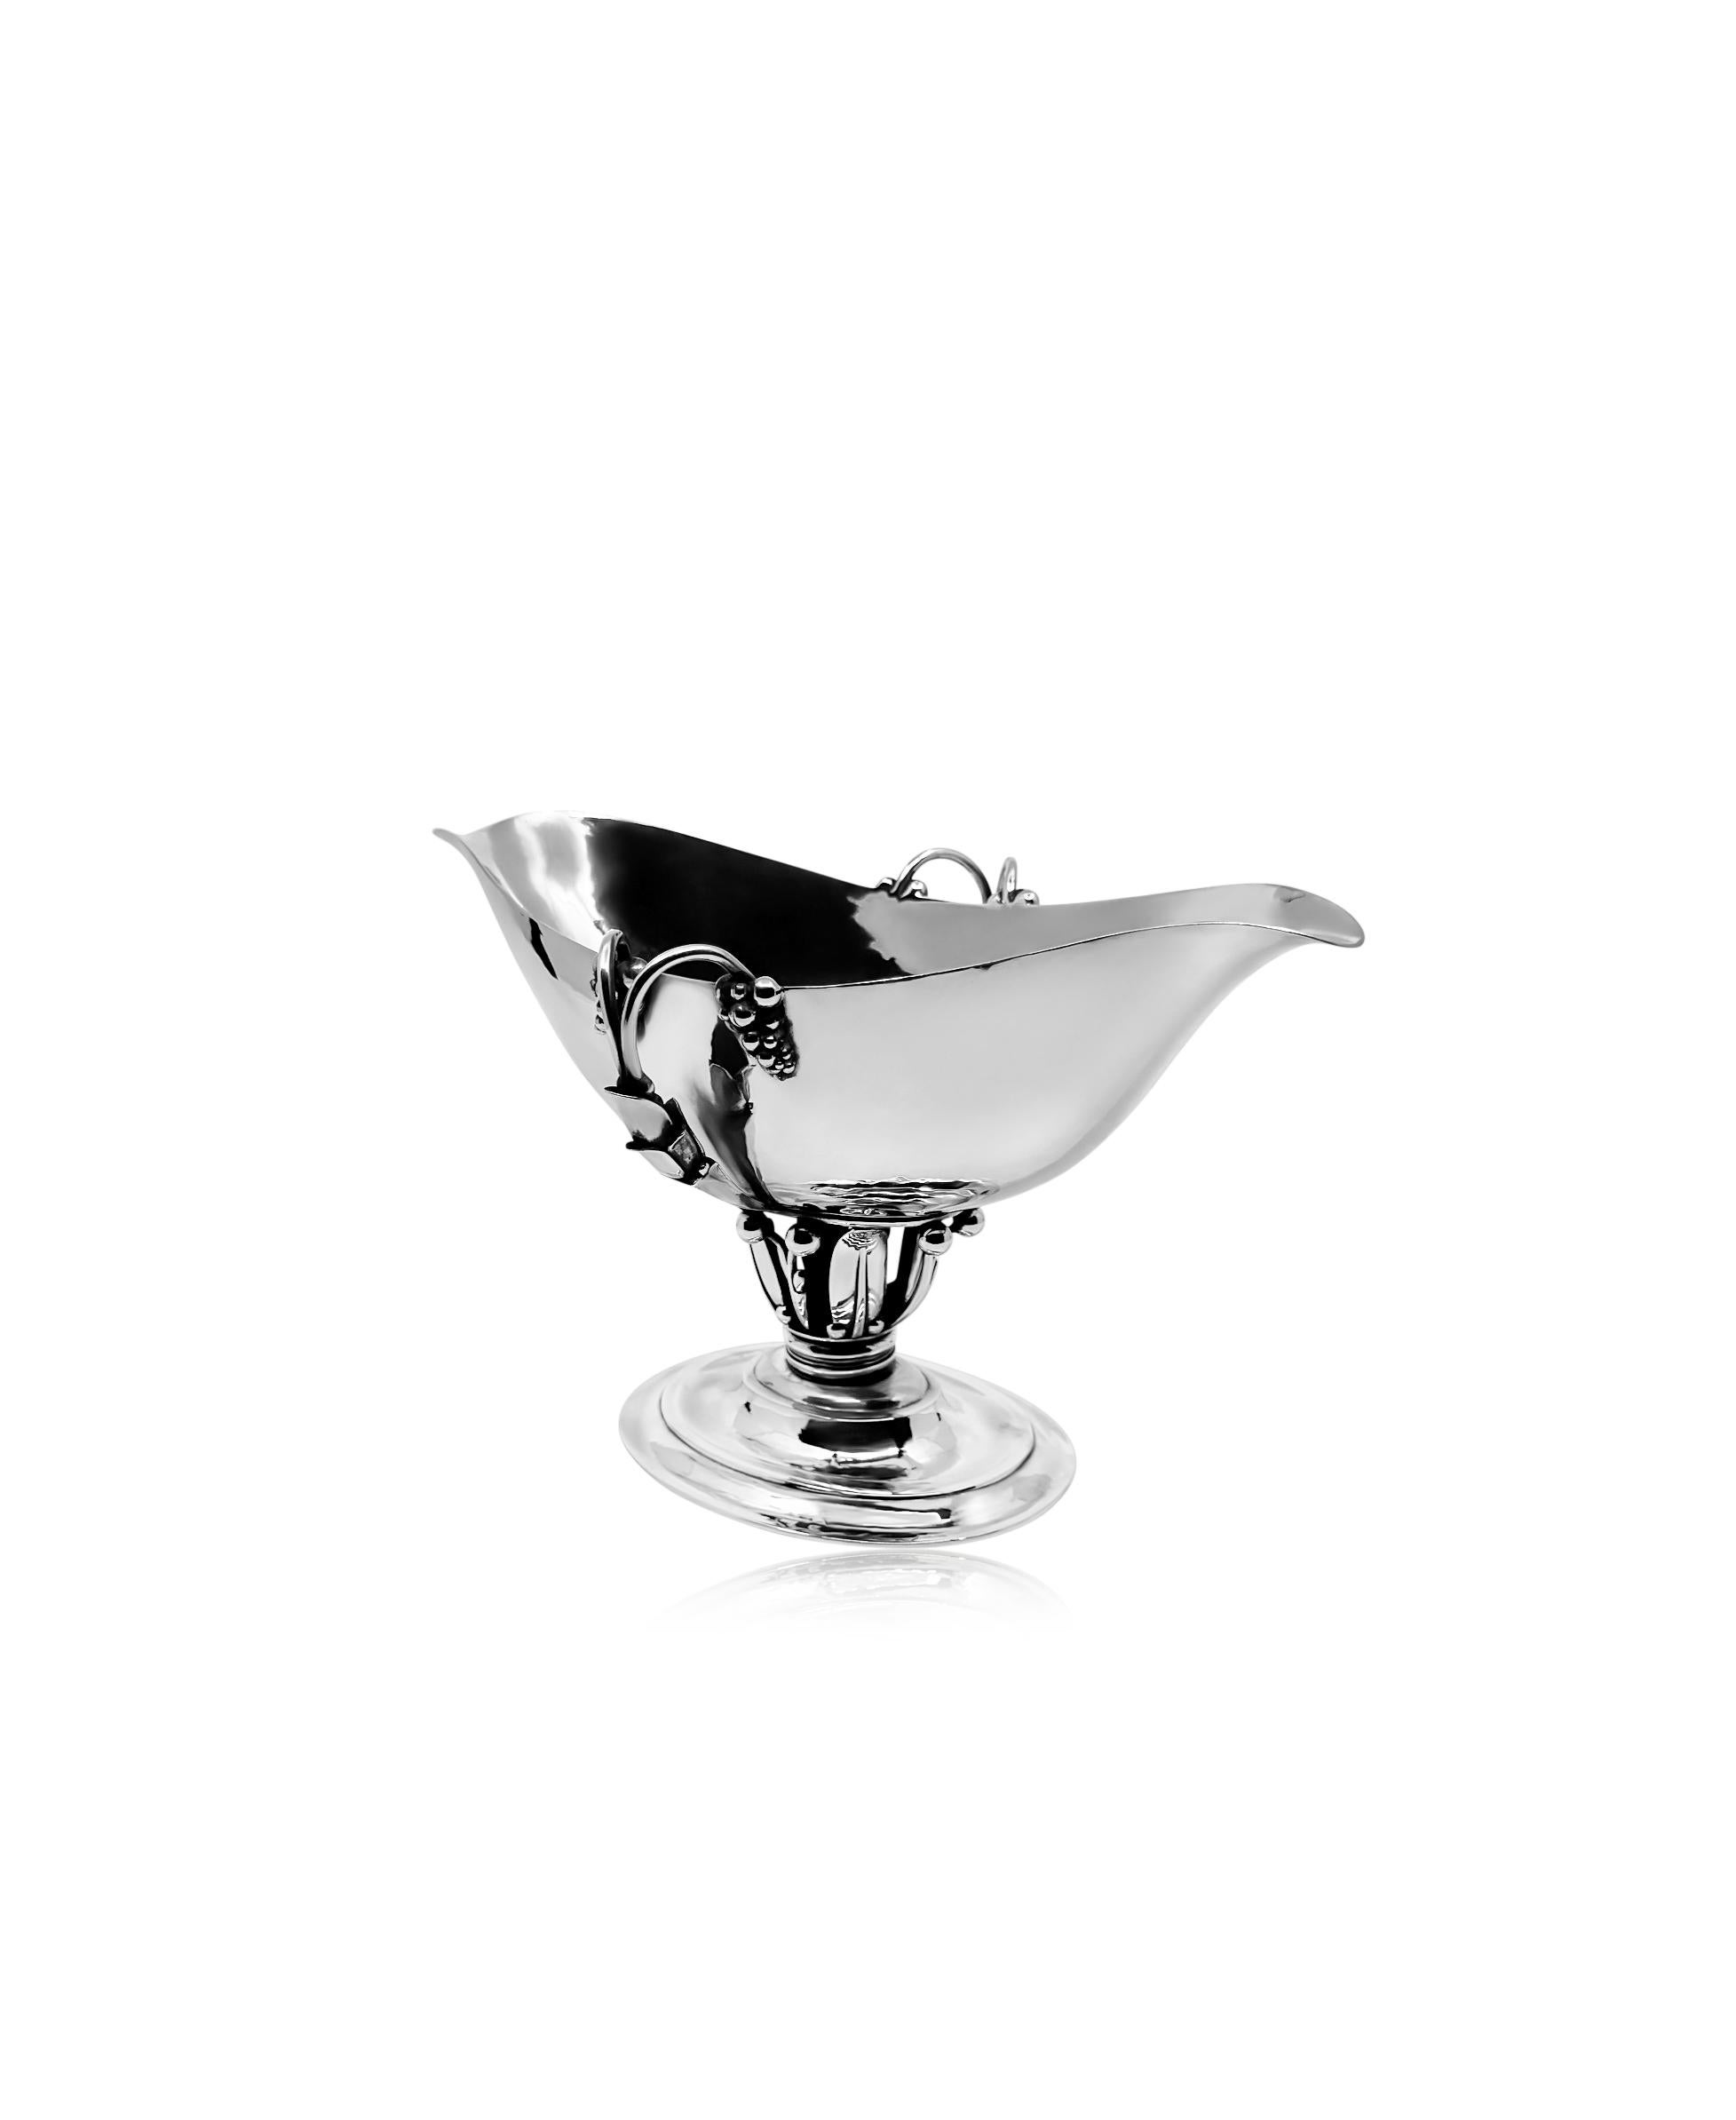 A generously proportioned vintage Georg Jensen grape sauce boat, featuring design #180 by Georg Jensen from the year 1918. This sizeable sauce boat boasts a distinctive double-spouted design, flanked on each side by two substantial grape clusters.